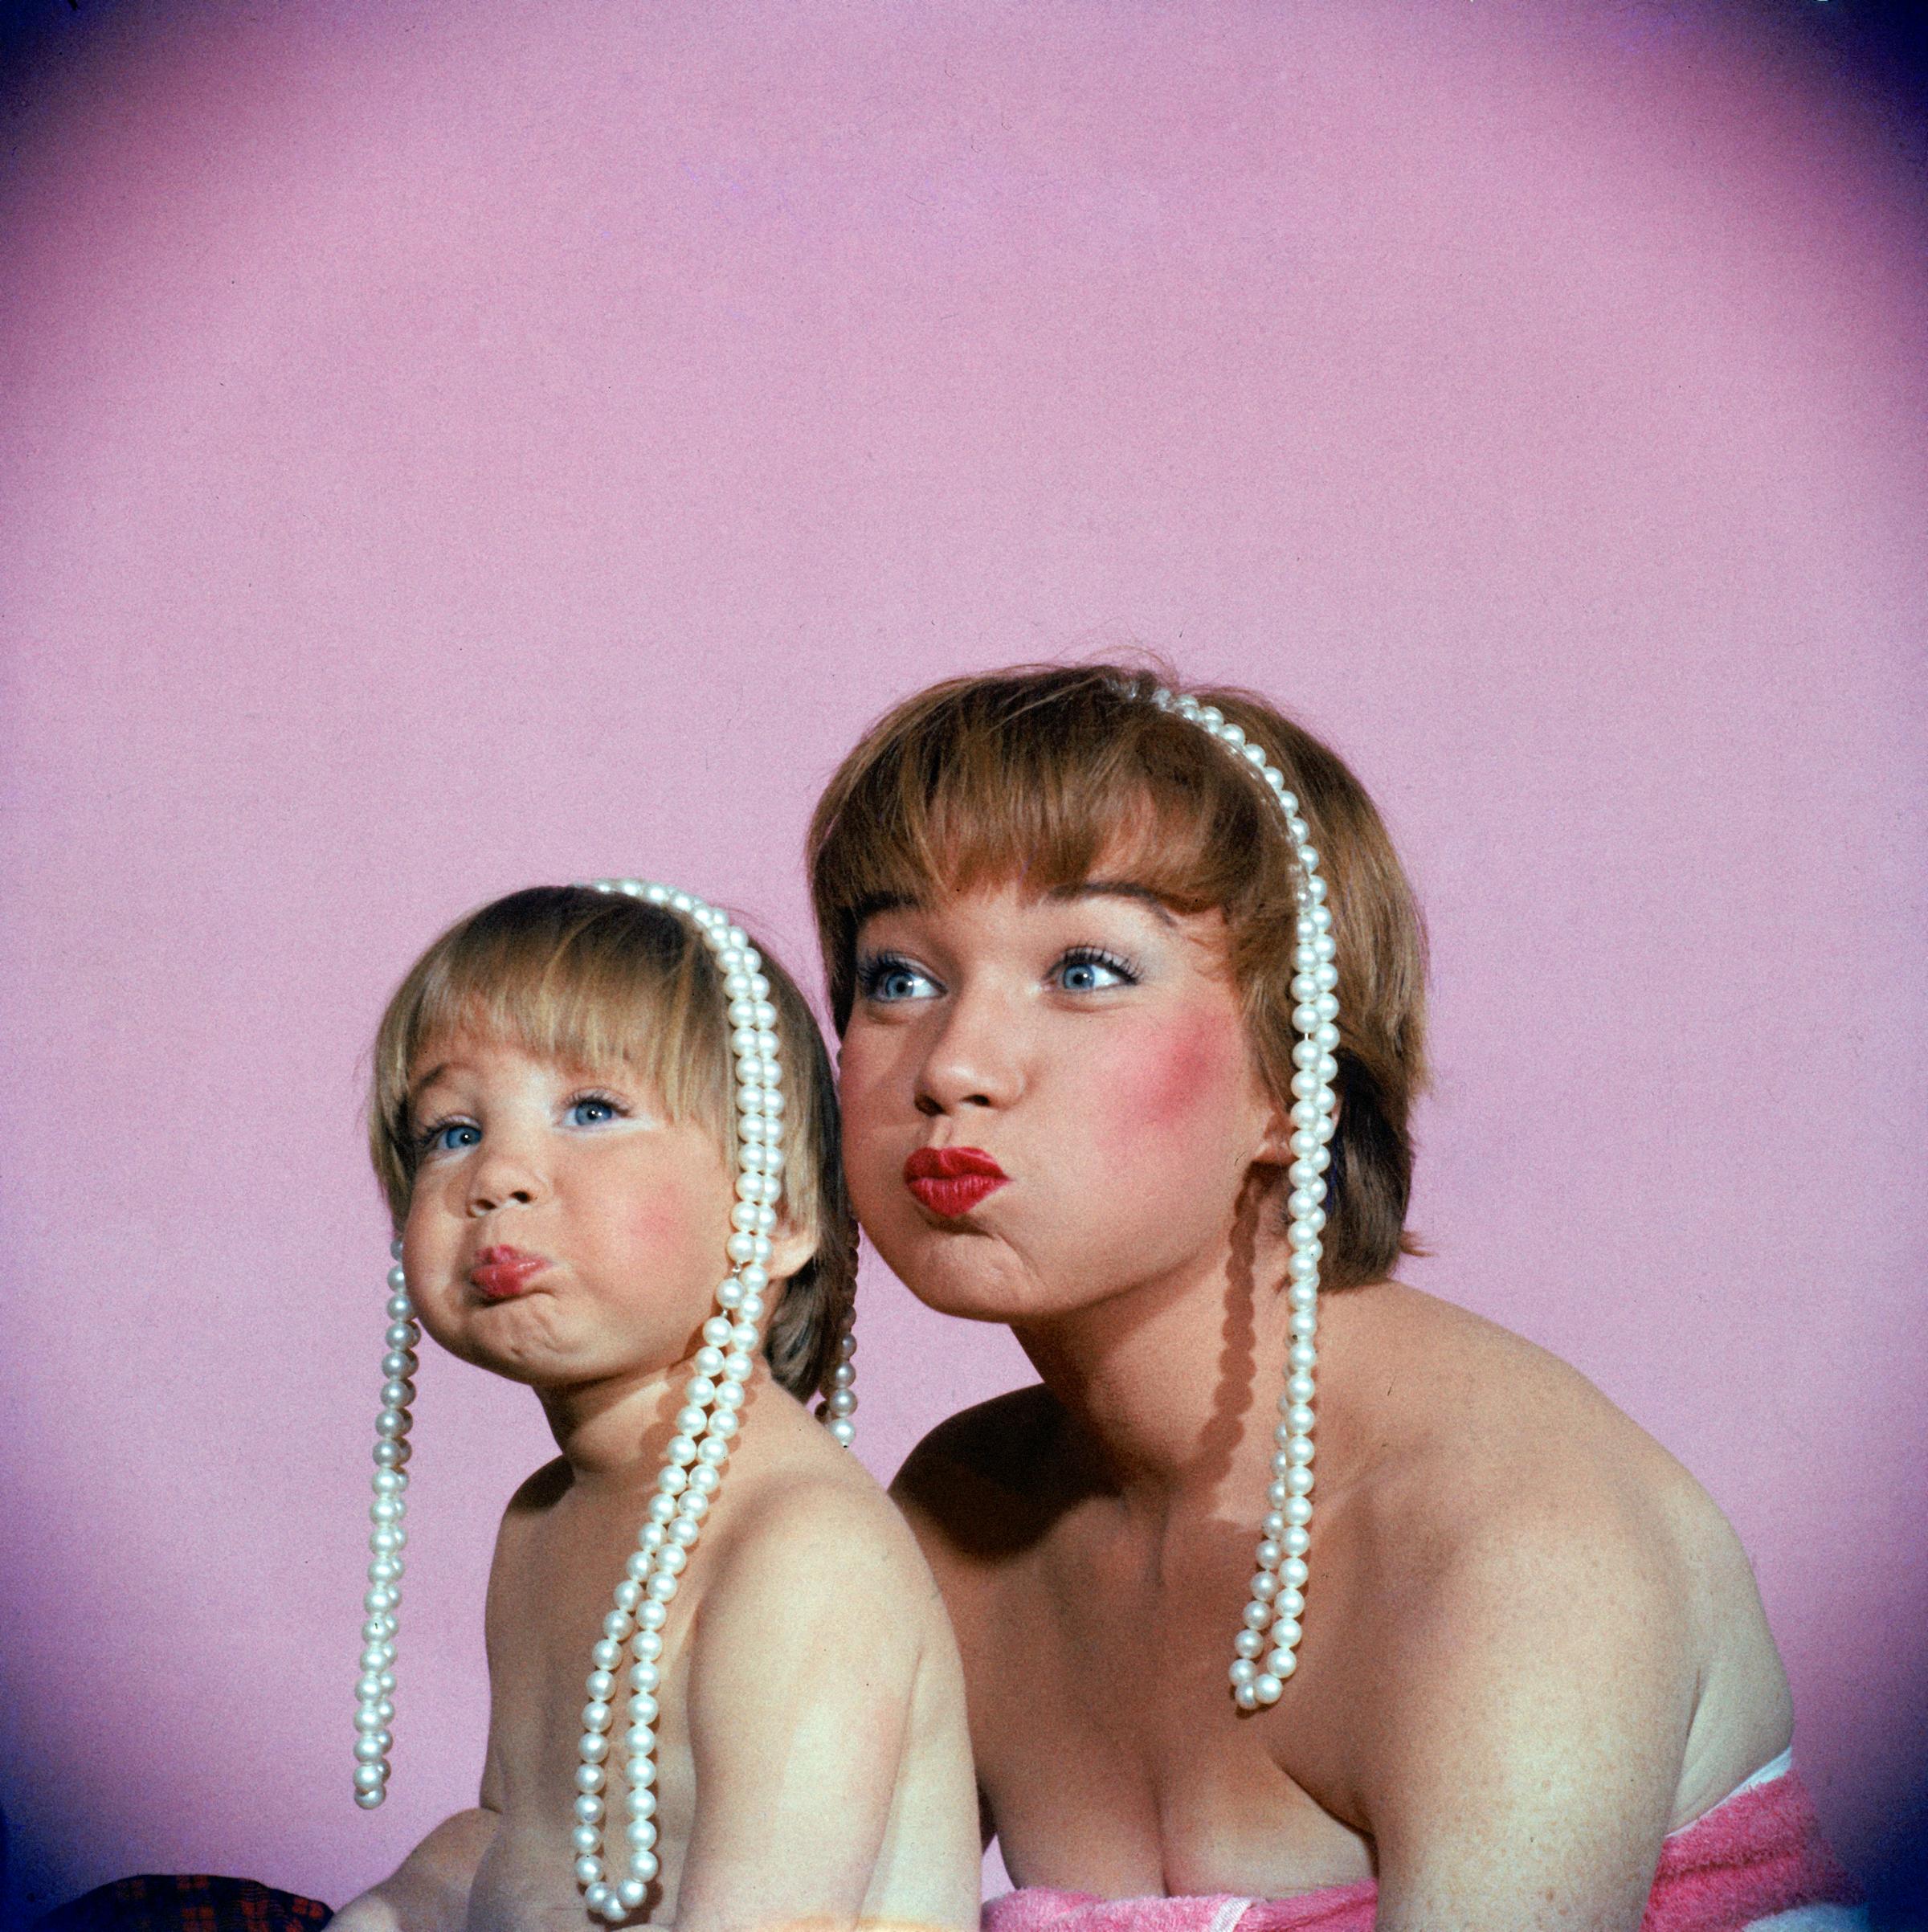 Twenty-four -year-old Shirley MacLaine pulls a funny face with her 2-year-old daughter, Sachi Parker, during a portrait session with LIFE's Allan Grant.